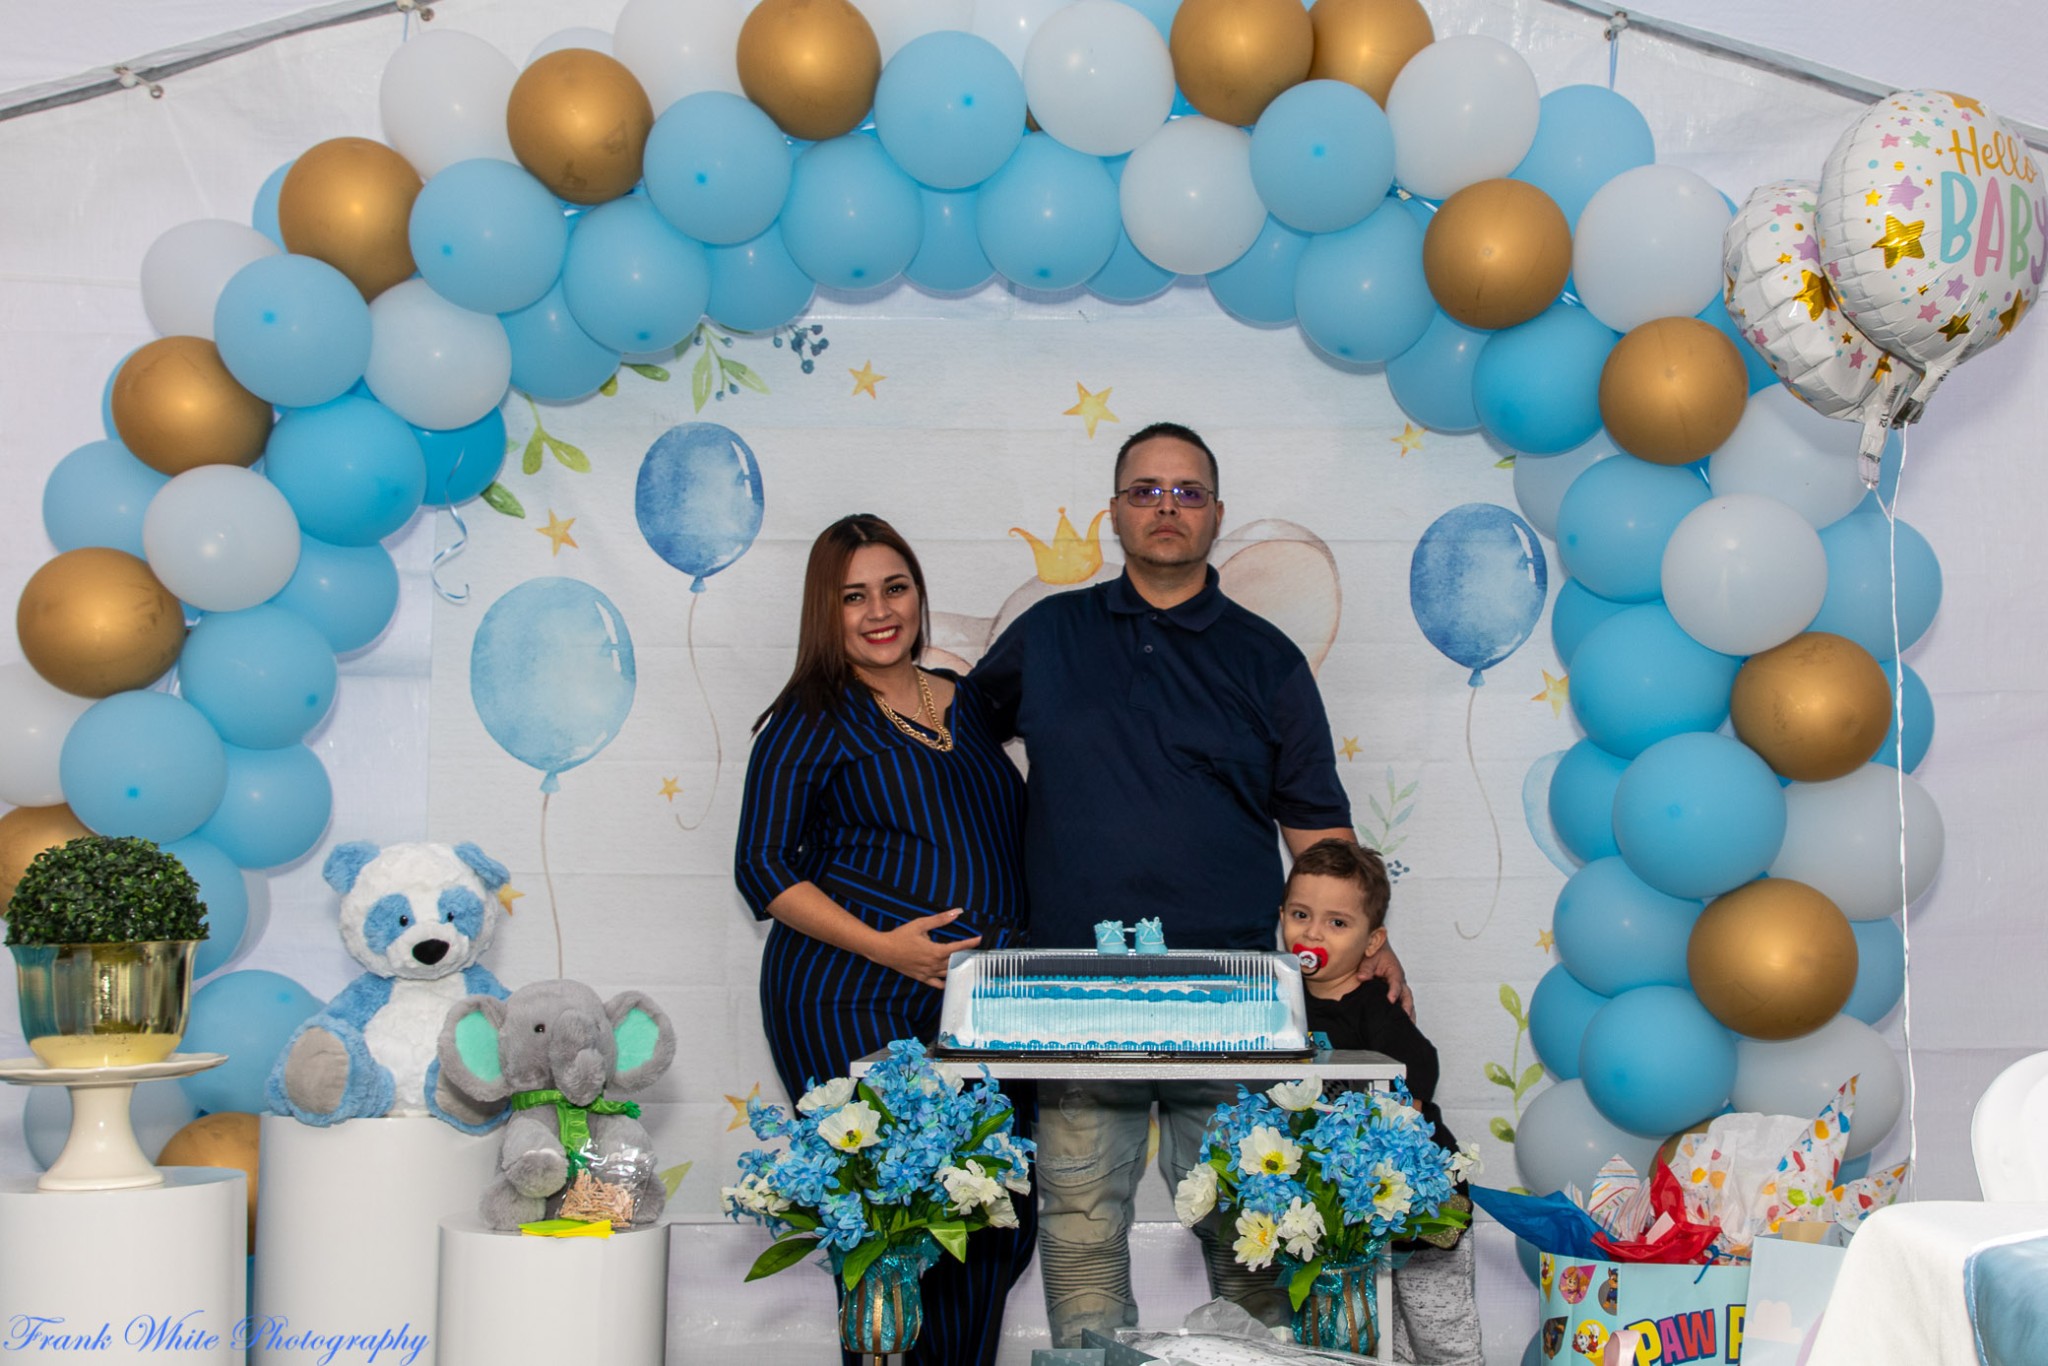 Christian-Baby-Shower-and-Family-Event-3.jpg